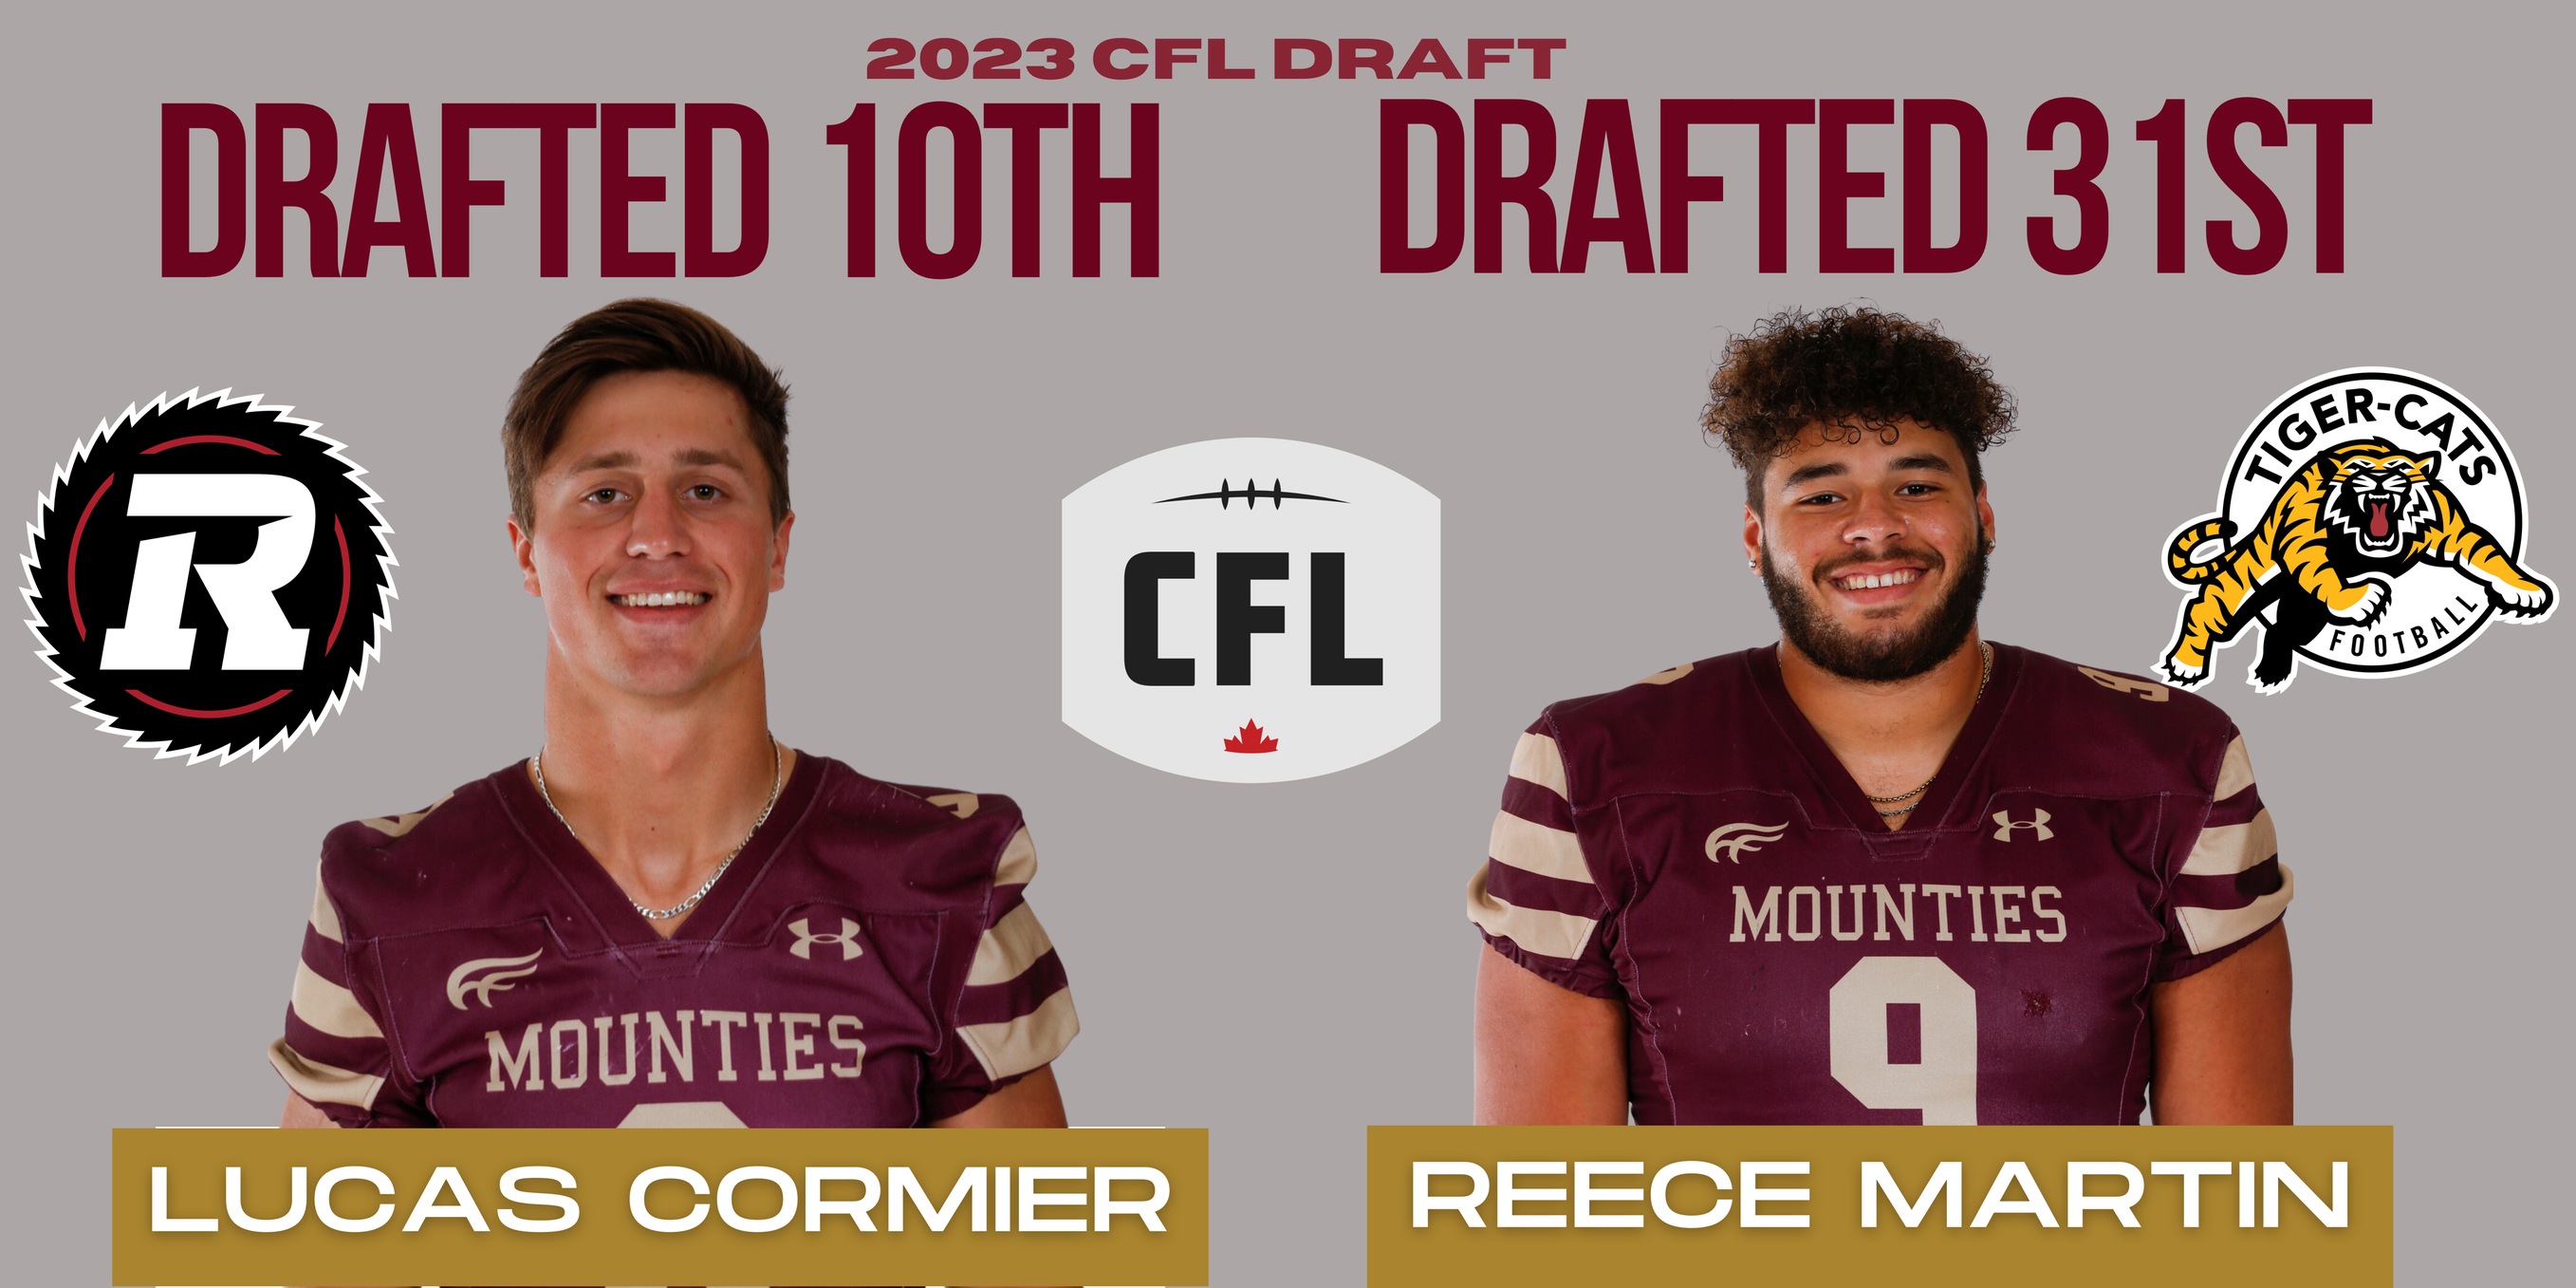 Football Mounties Lucas Cormier and Reece Martin selected in 2023 CFL Draft